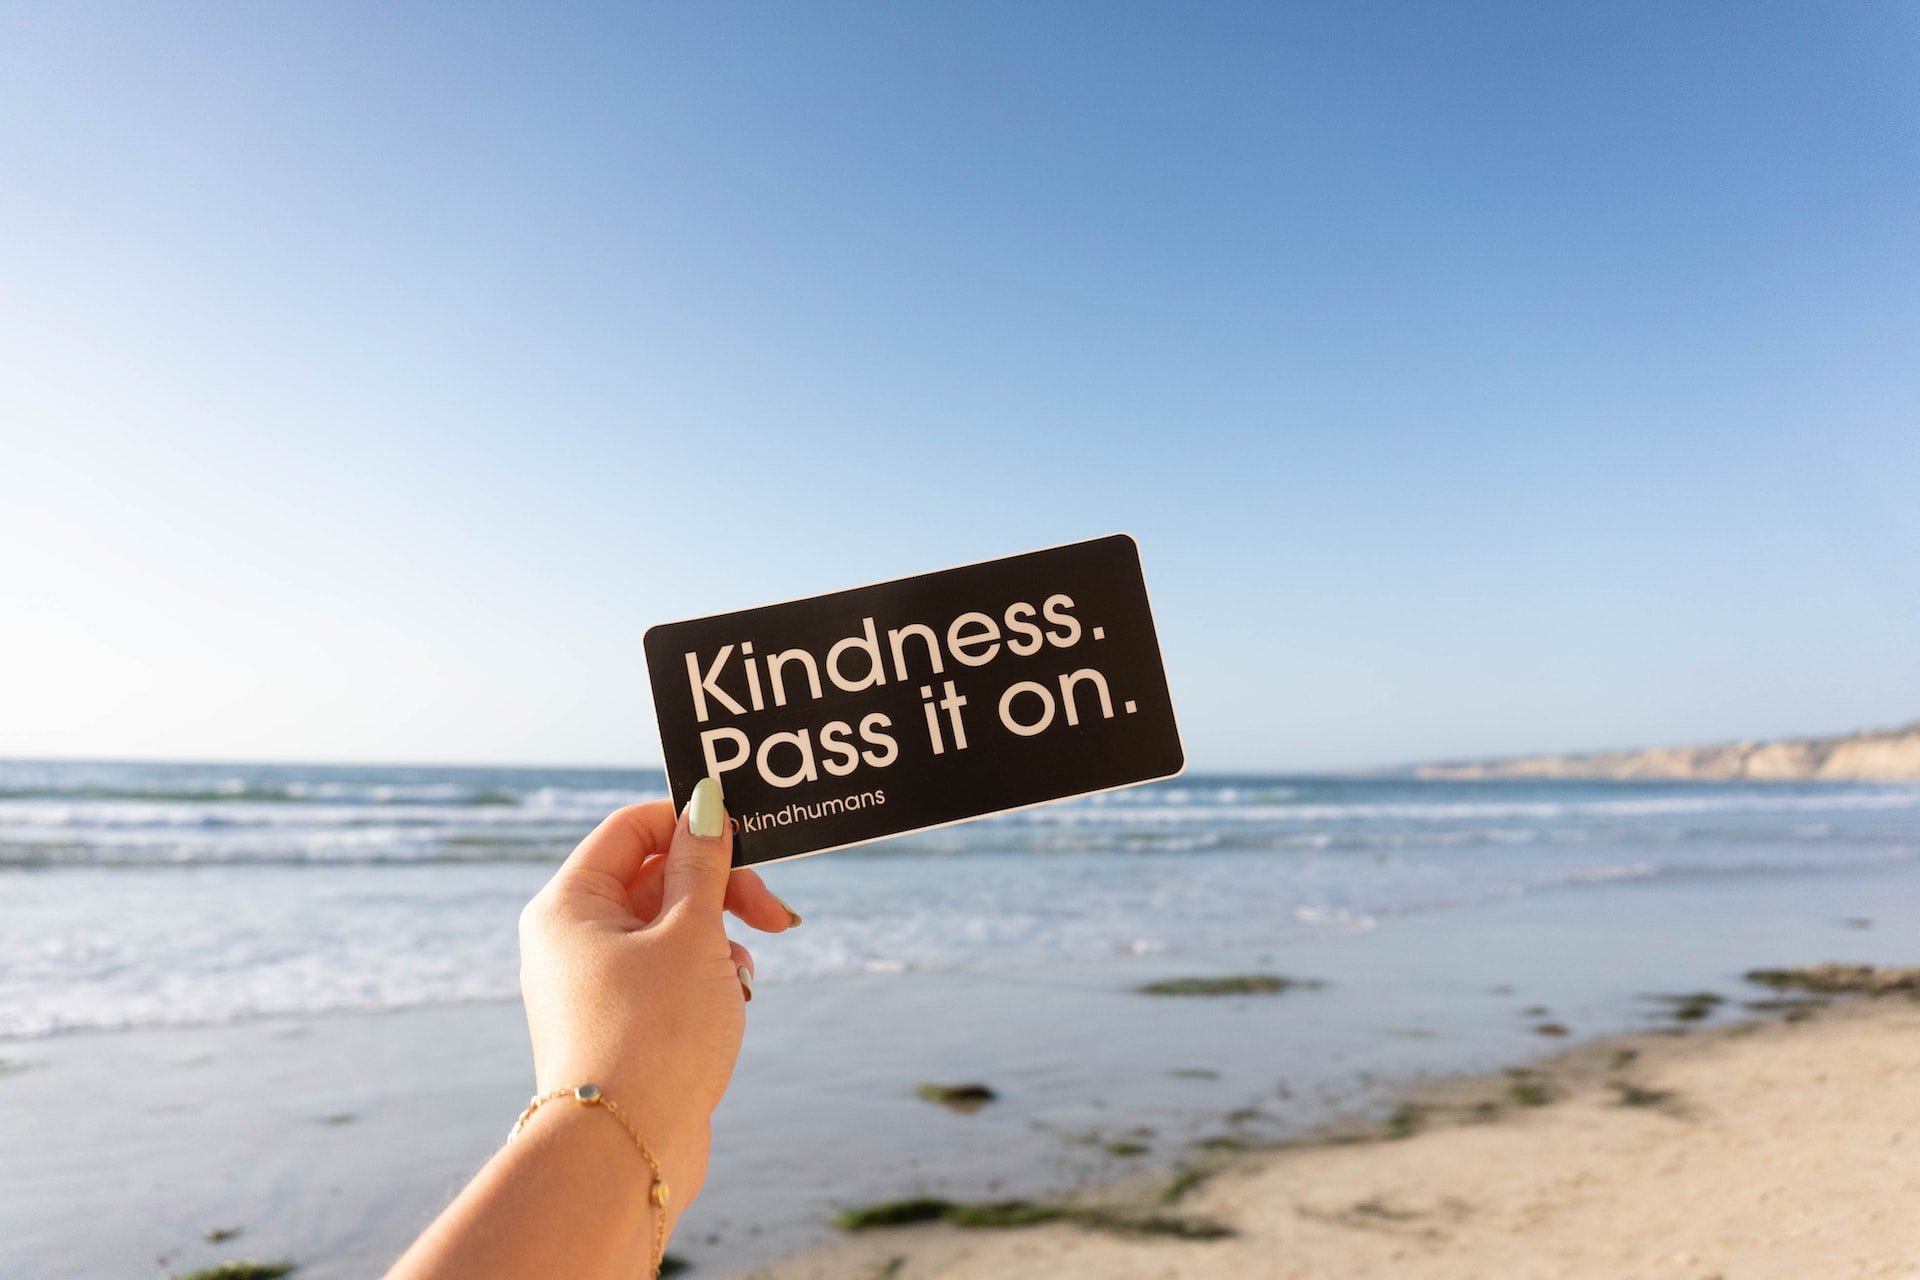 A hand holding a card in front of the ocean that says 'kindness. pass it on'